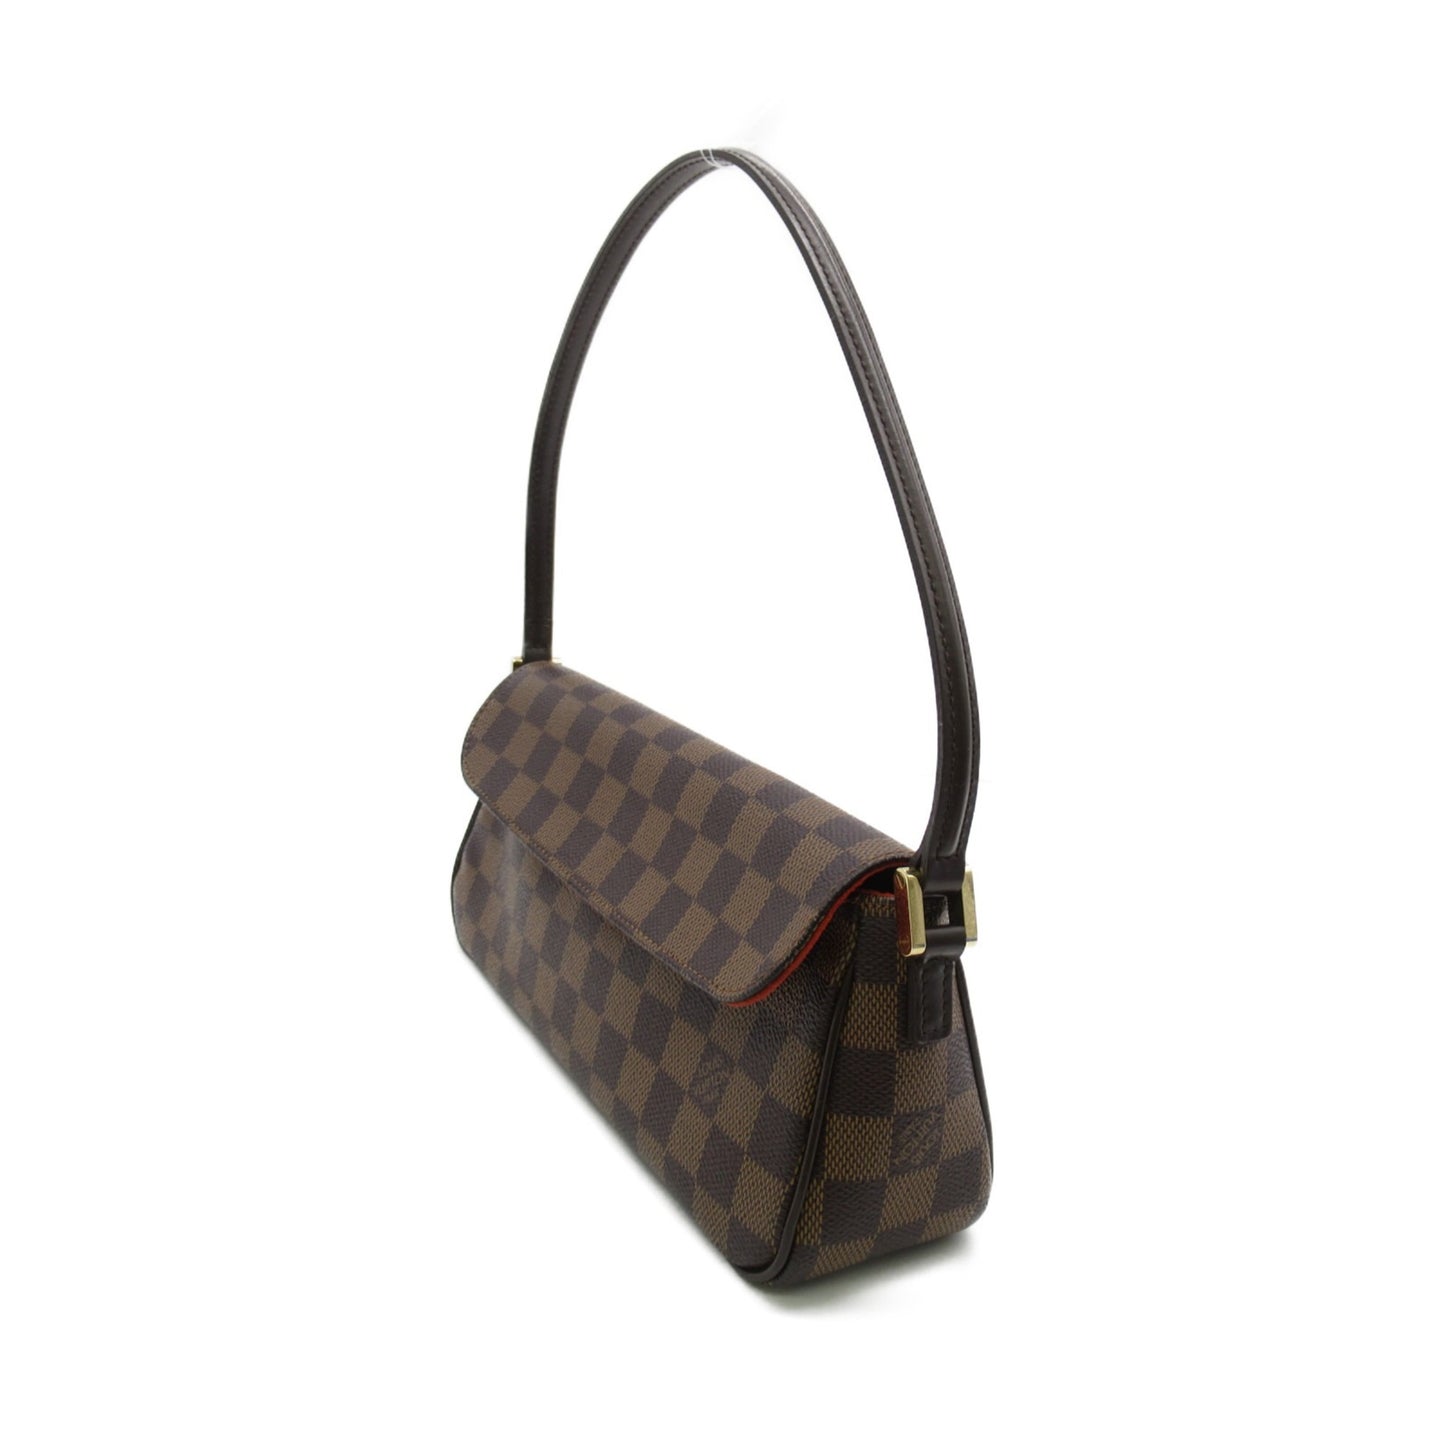 Louis Vuitton Women's Luxurious Canvas Shoulder Bag with Timeless Elegance in Brown